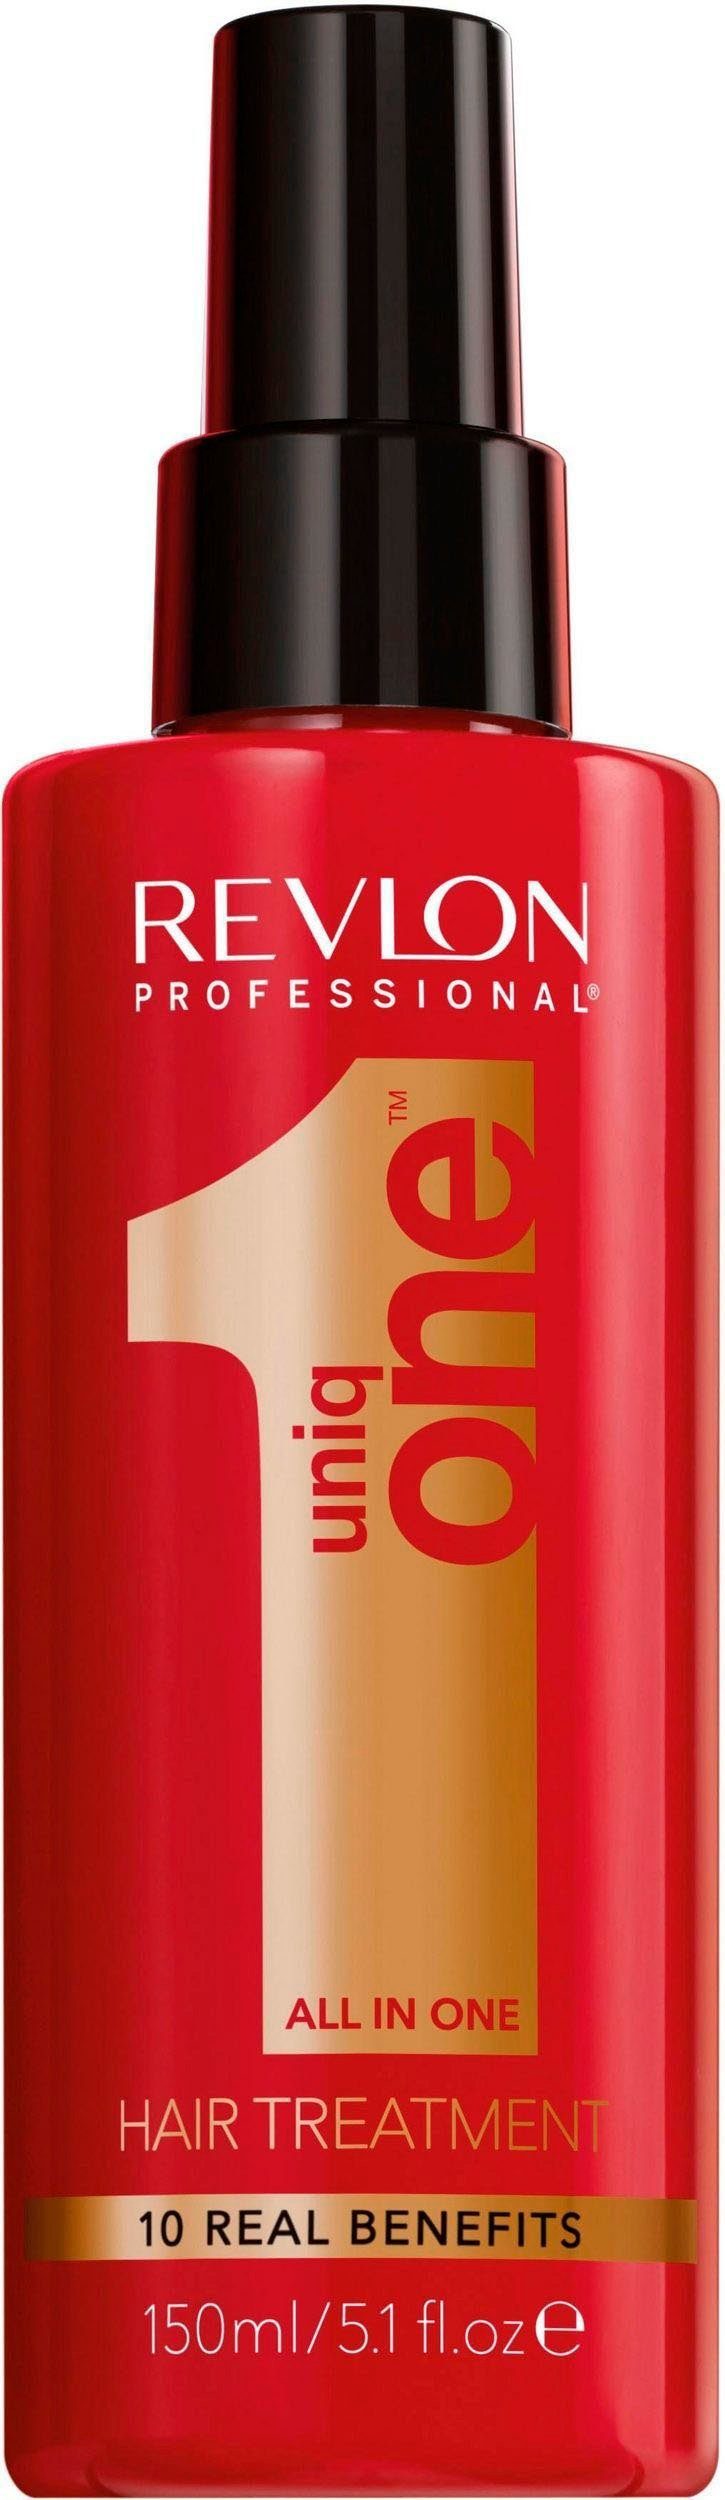 one One Hair in Leave-in Treatment PROFESSIONAL All Uniq Pflege REVLON